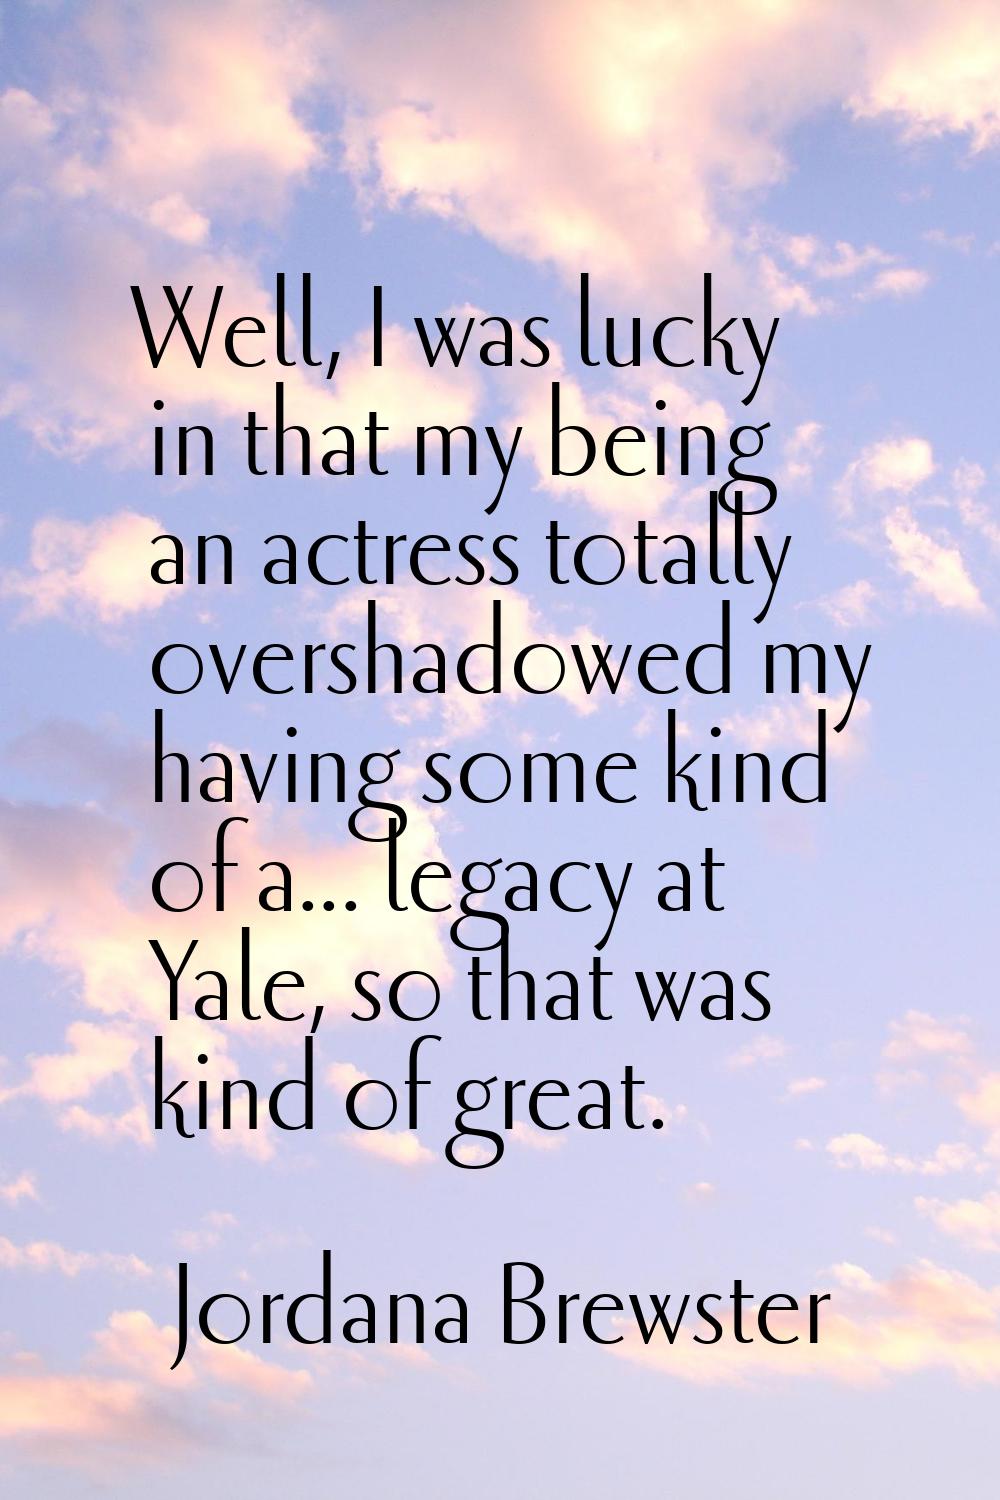 Well, I was lucky in that my being an actress totally overshadowed my having some kind of a... lega